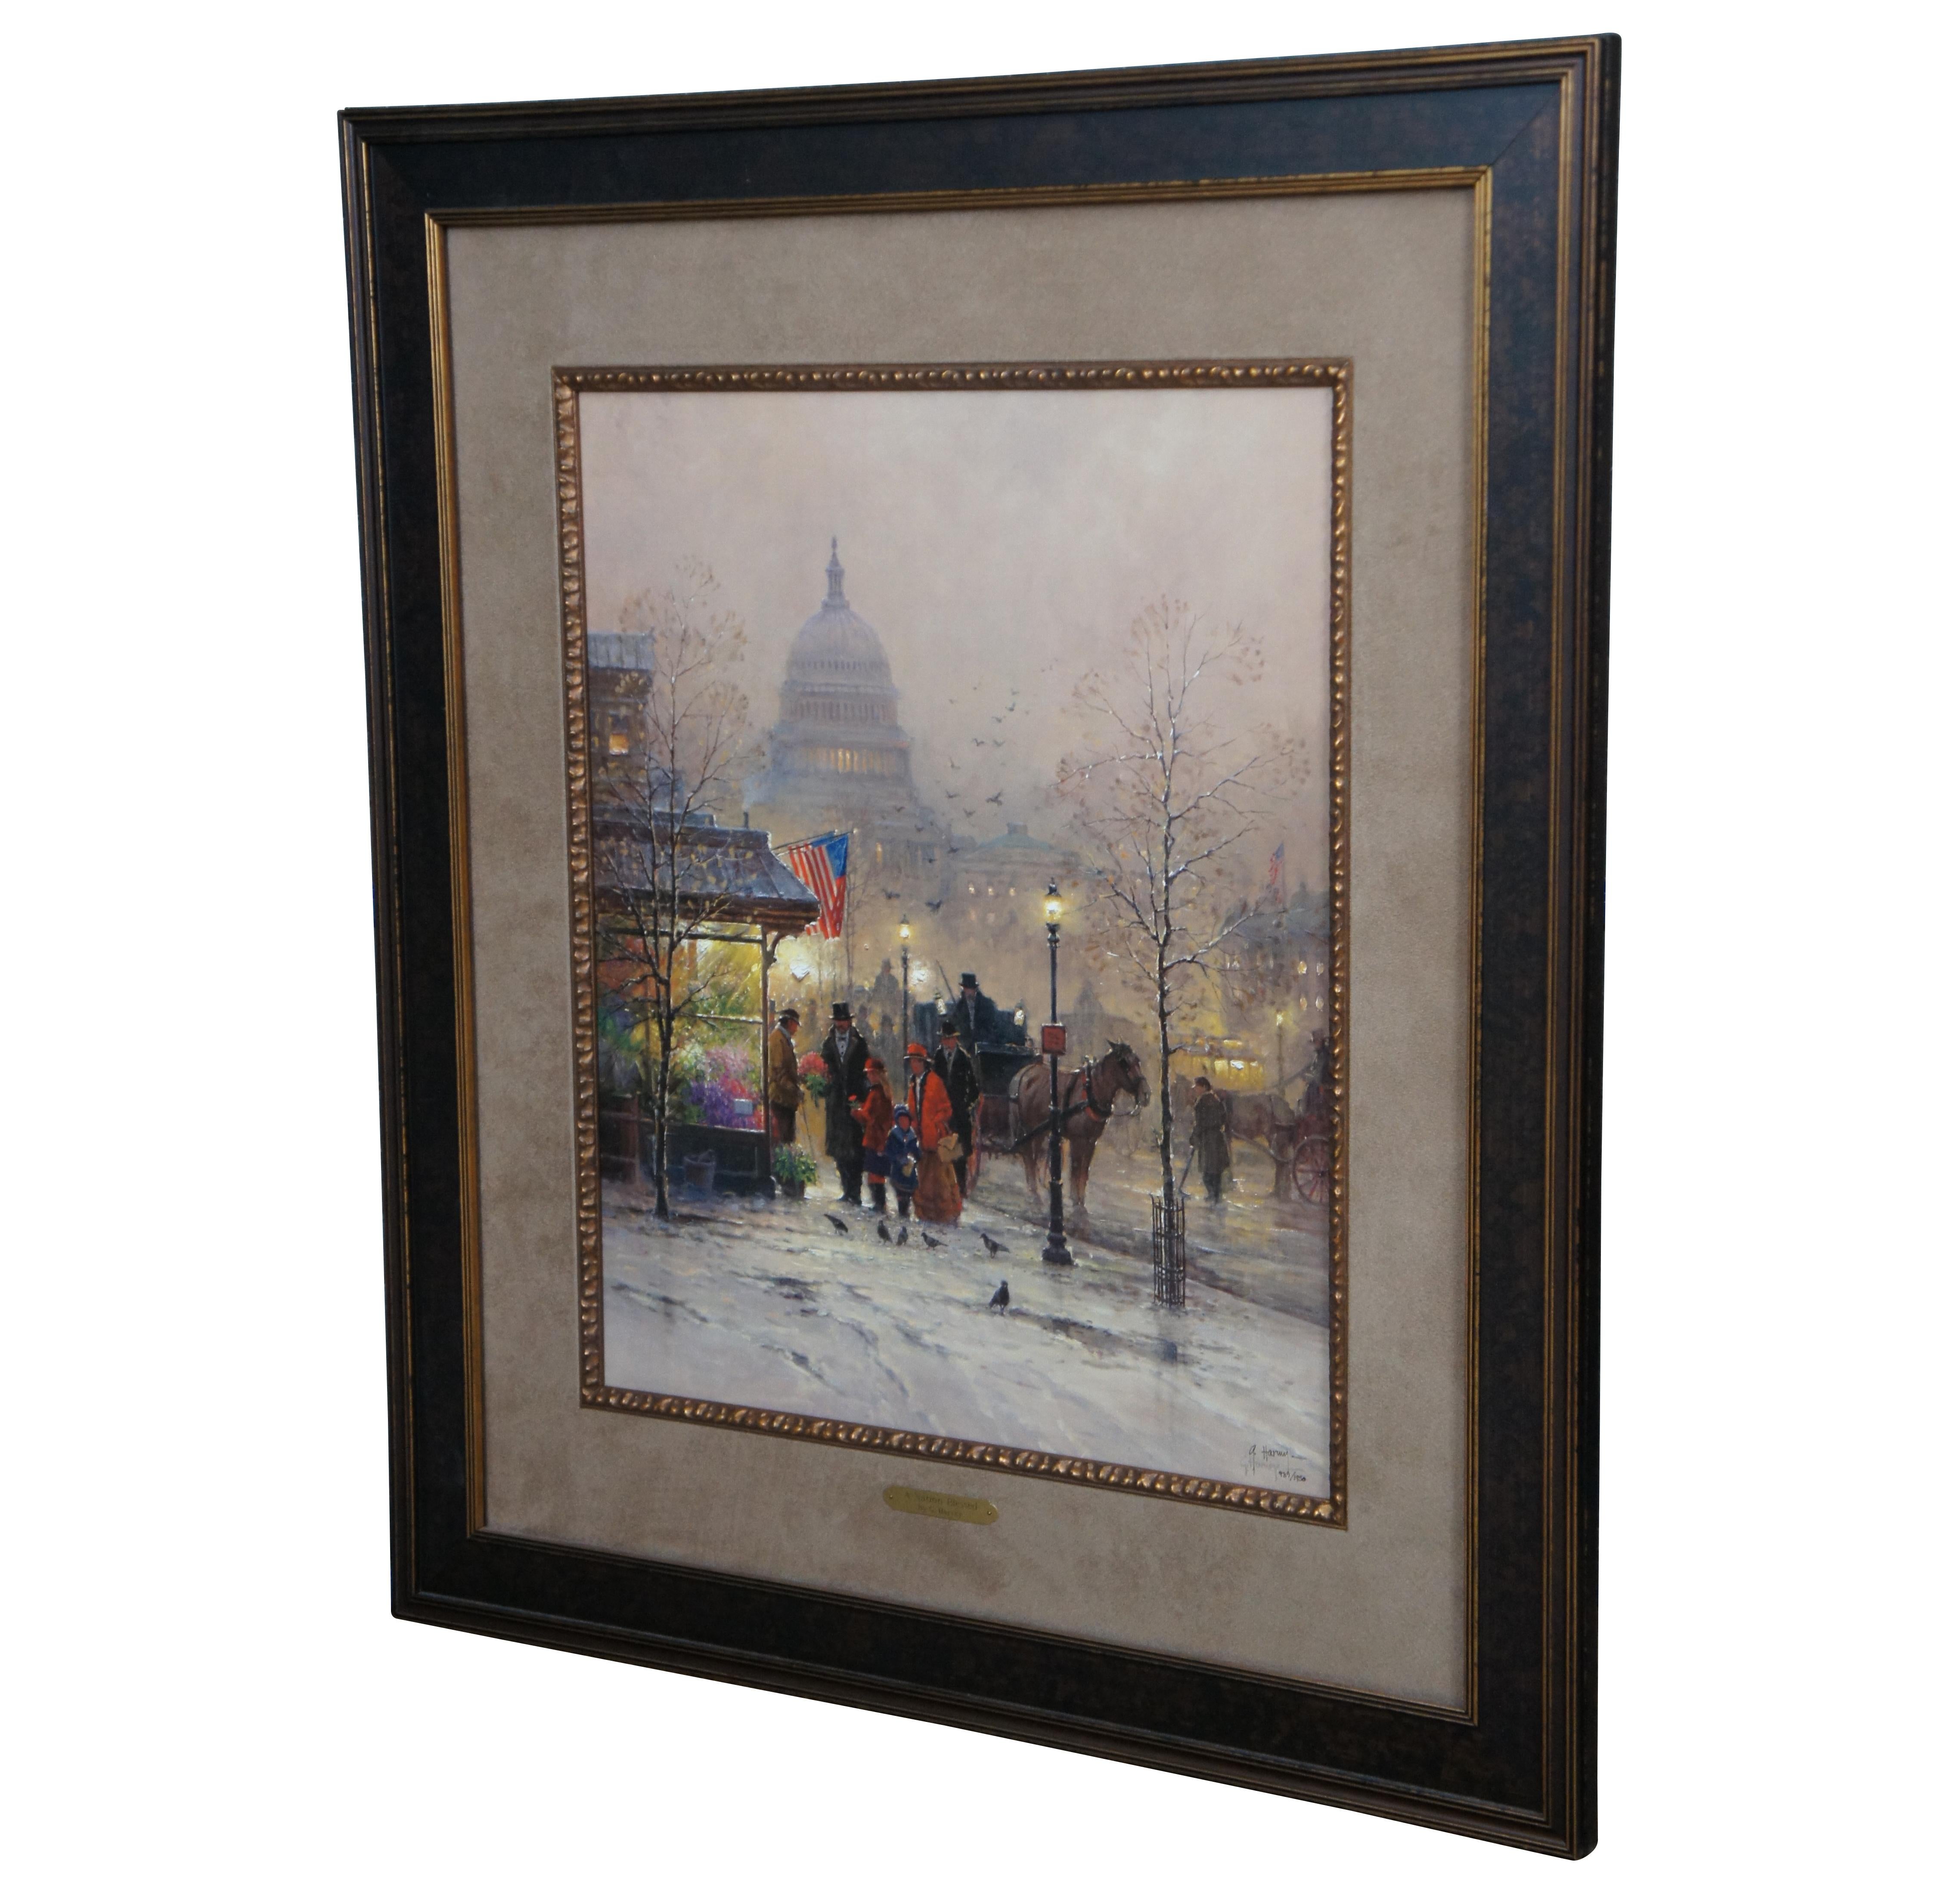 Vintage limited edition print showing Victorian era figures at a flower shop with horse and carriage in the street below the Capitol building, titled “A Nation Blessed” by G. Harvey. Issued in 1997 by Somerset House Publishing, signed and numbered